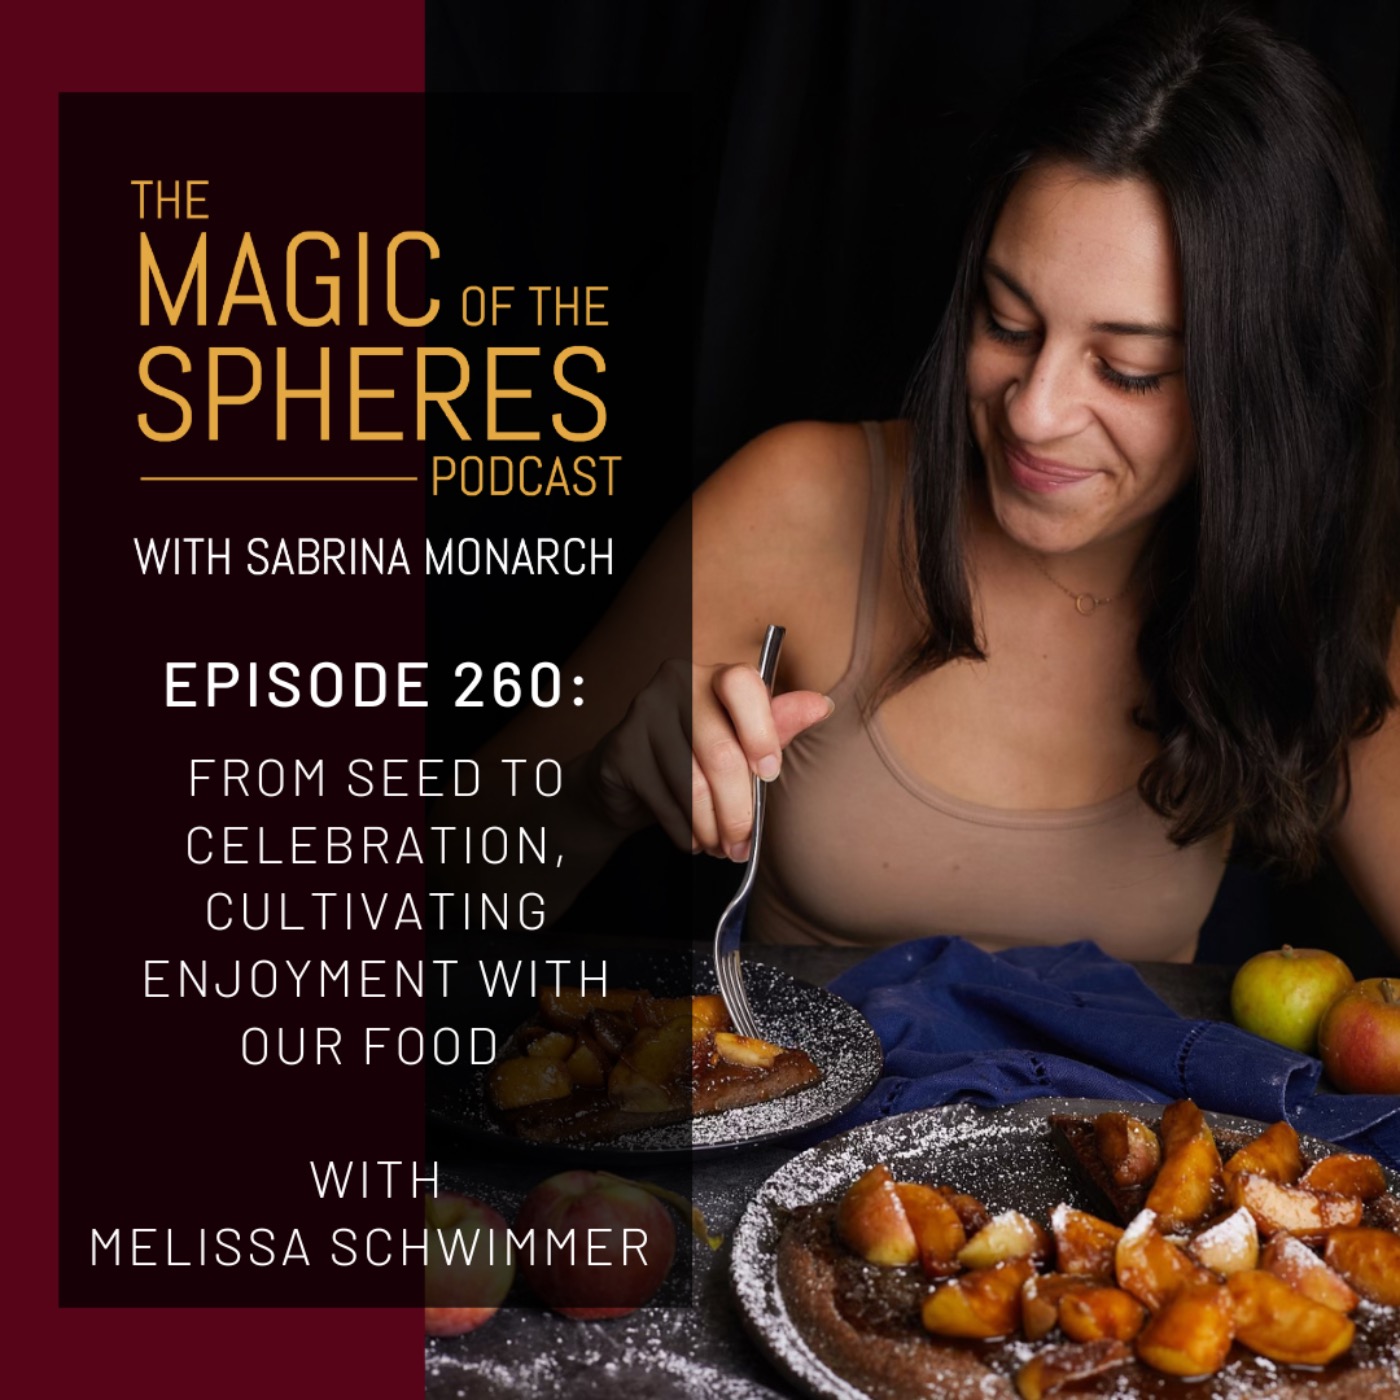 From Seed to Celebration, Cultivating Enjoyment with our Food with Melissa Schwimmer